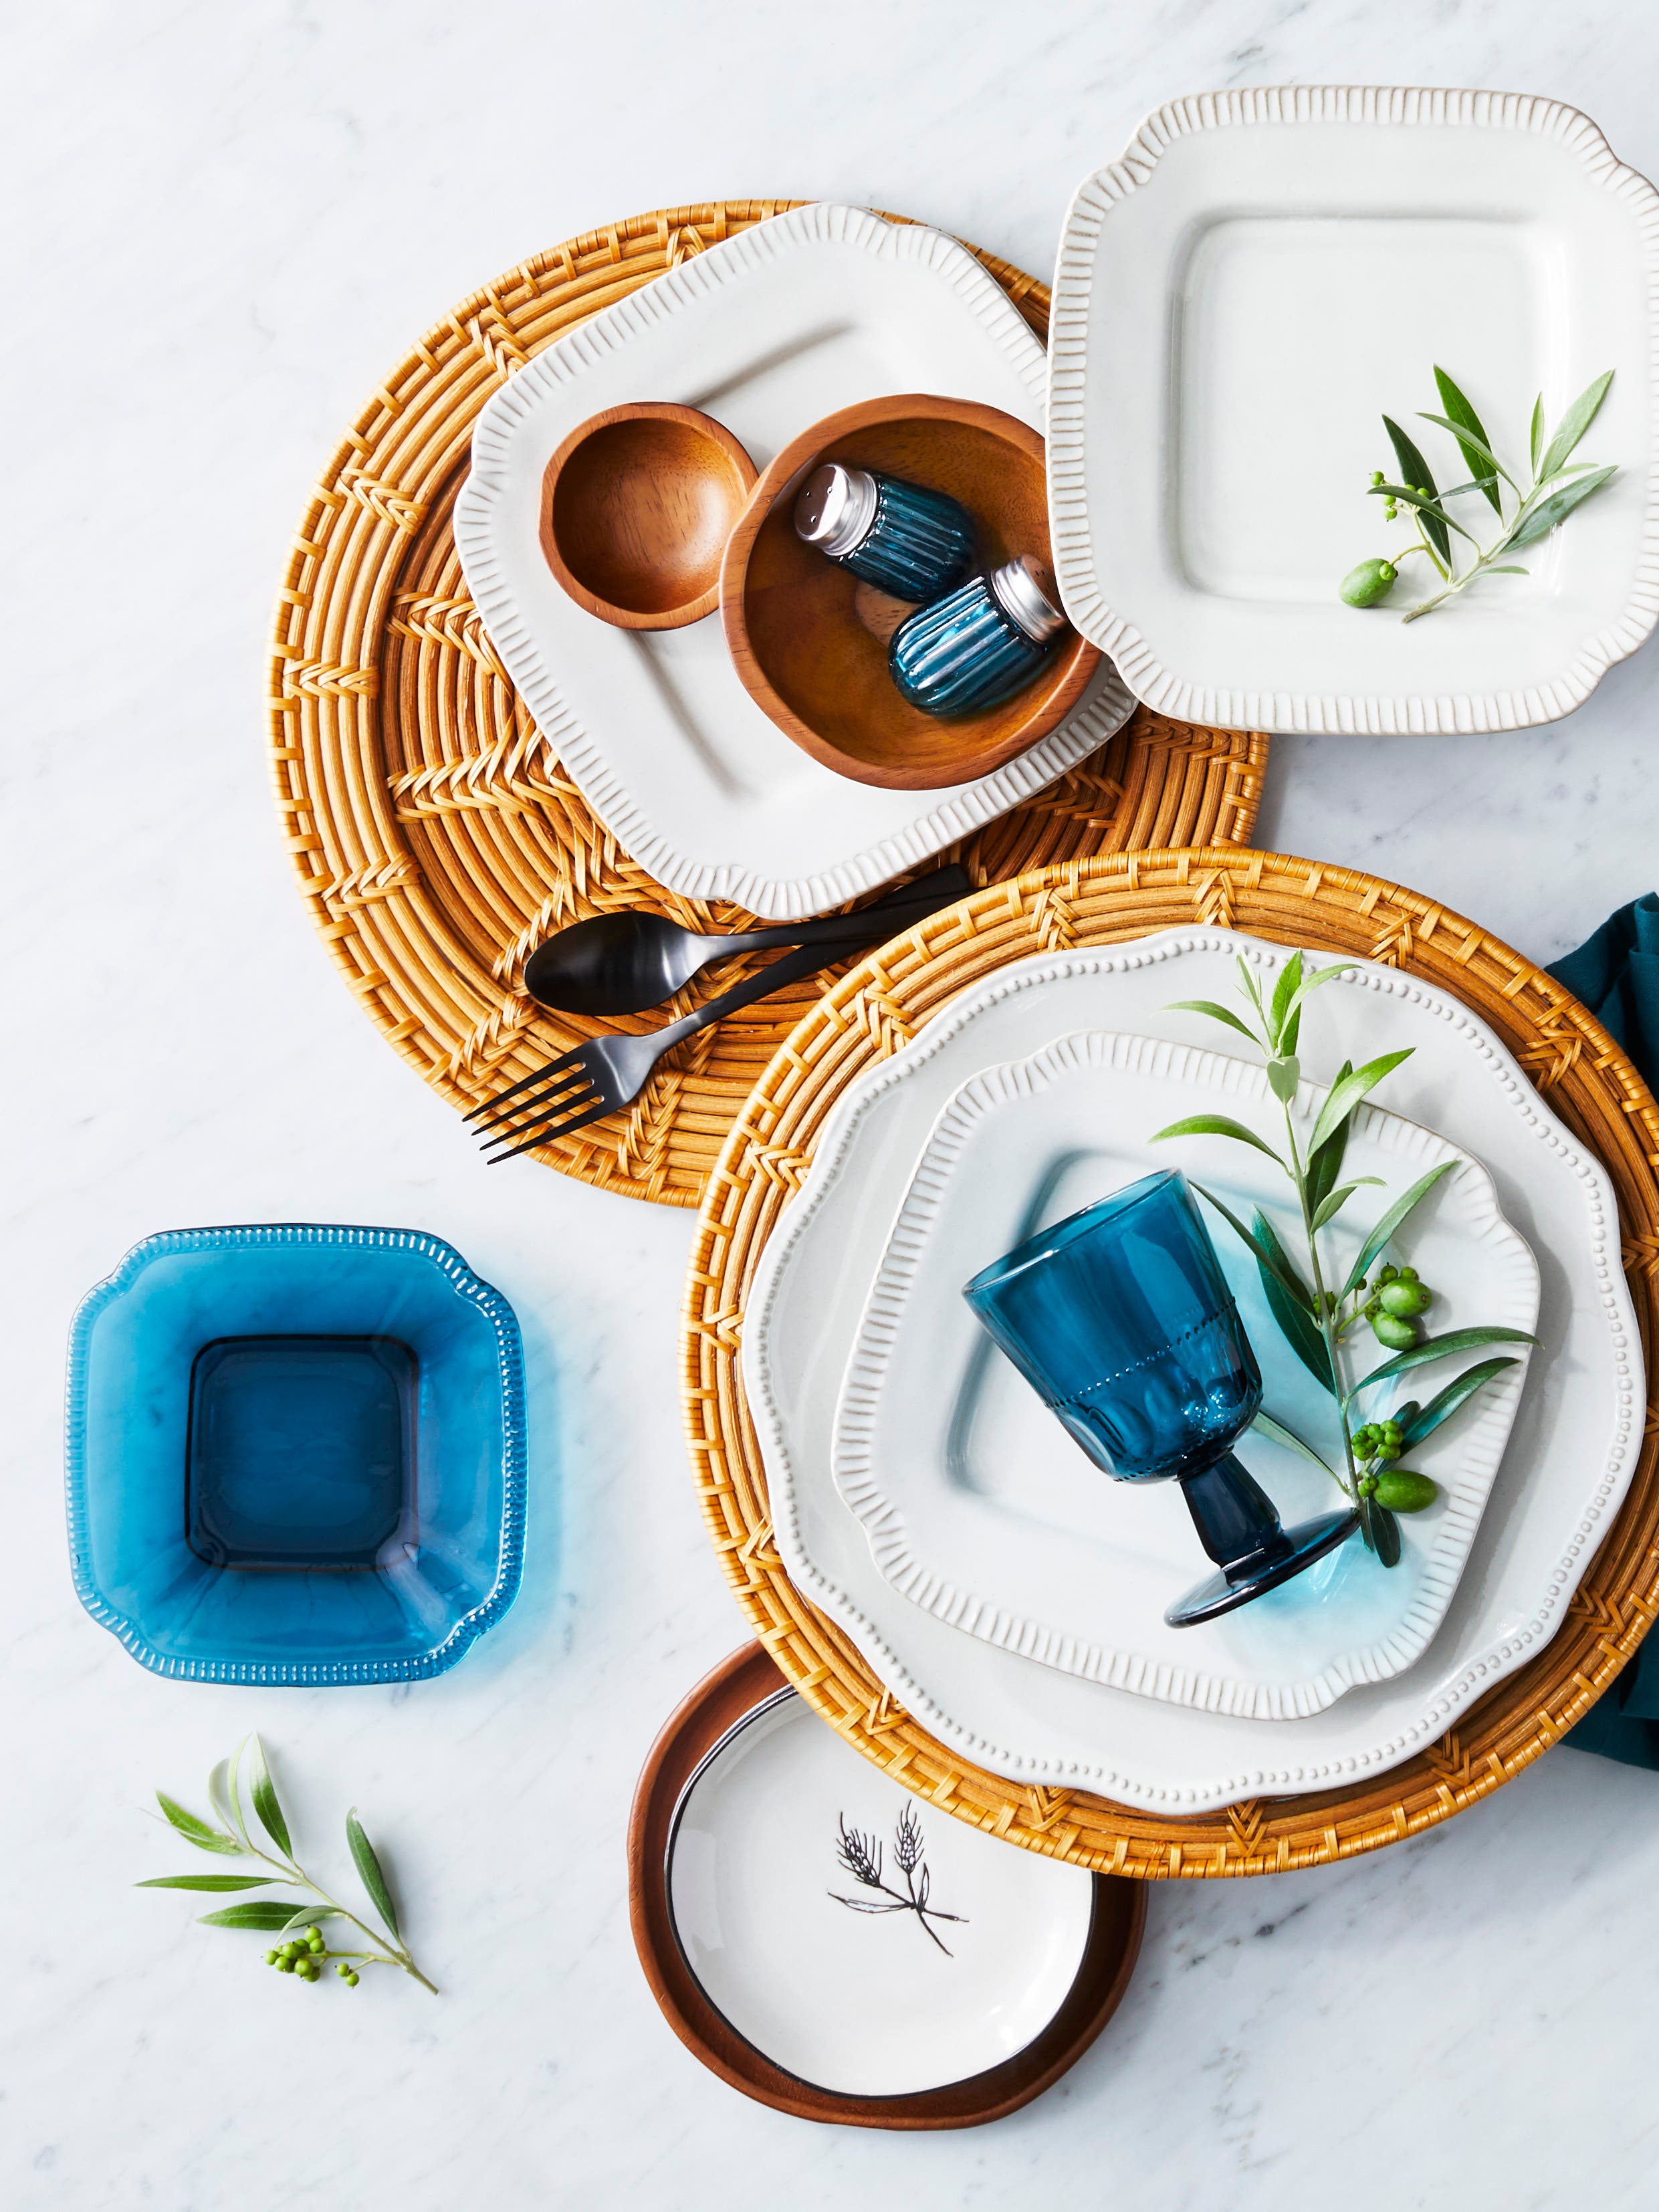 We Saw Target’s New Magnolia Line Before Anyone Else, and It’s Perfect